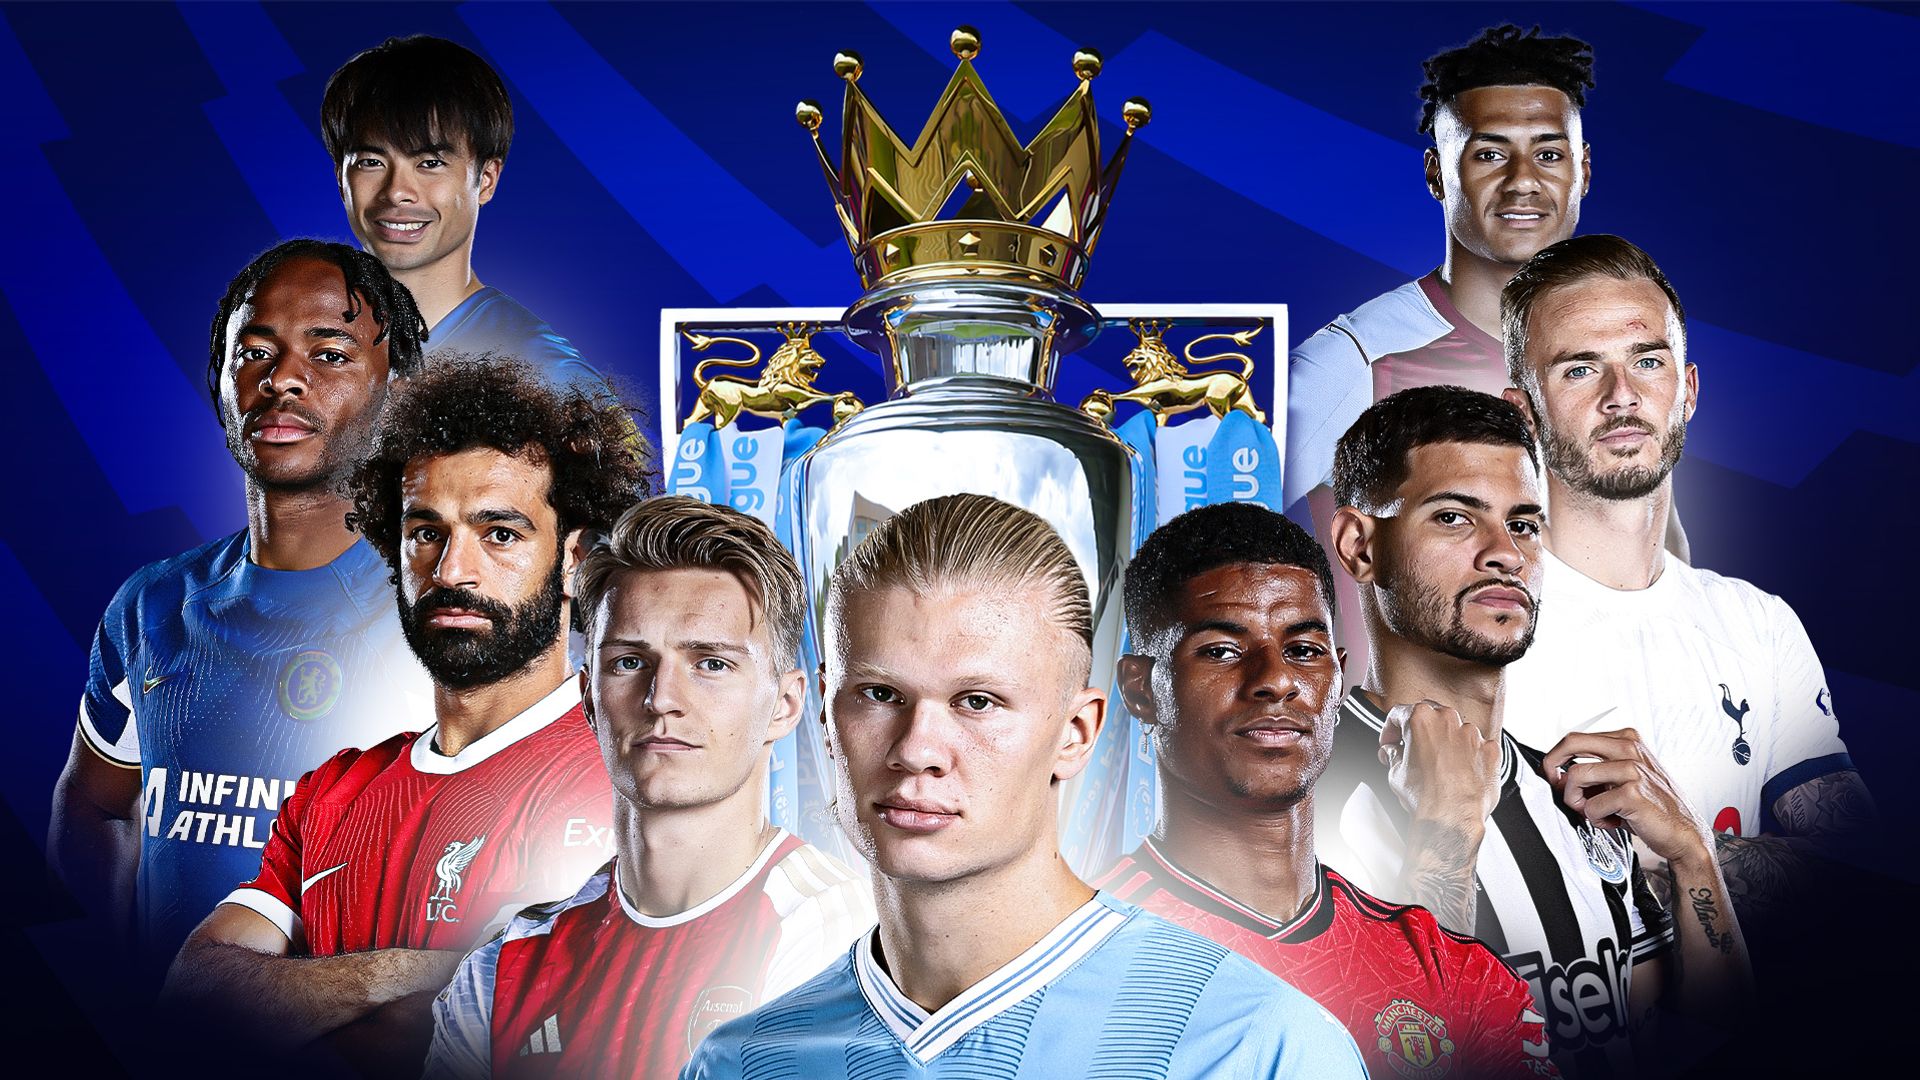 Man Utd vs Arsenal & Spurs vs Man City to be shown live on Sky in May